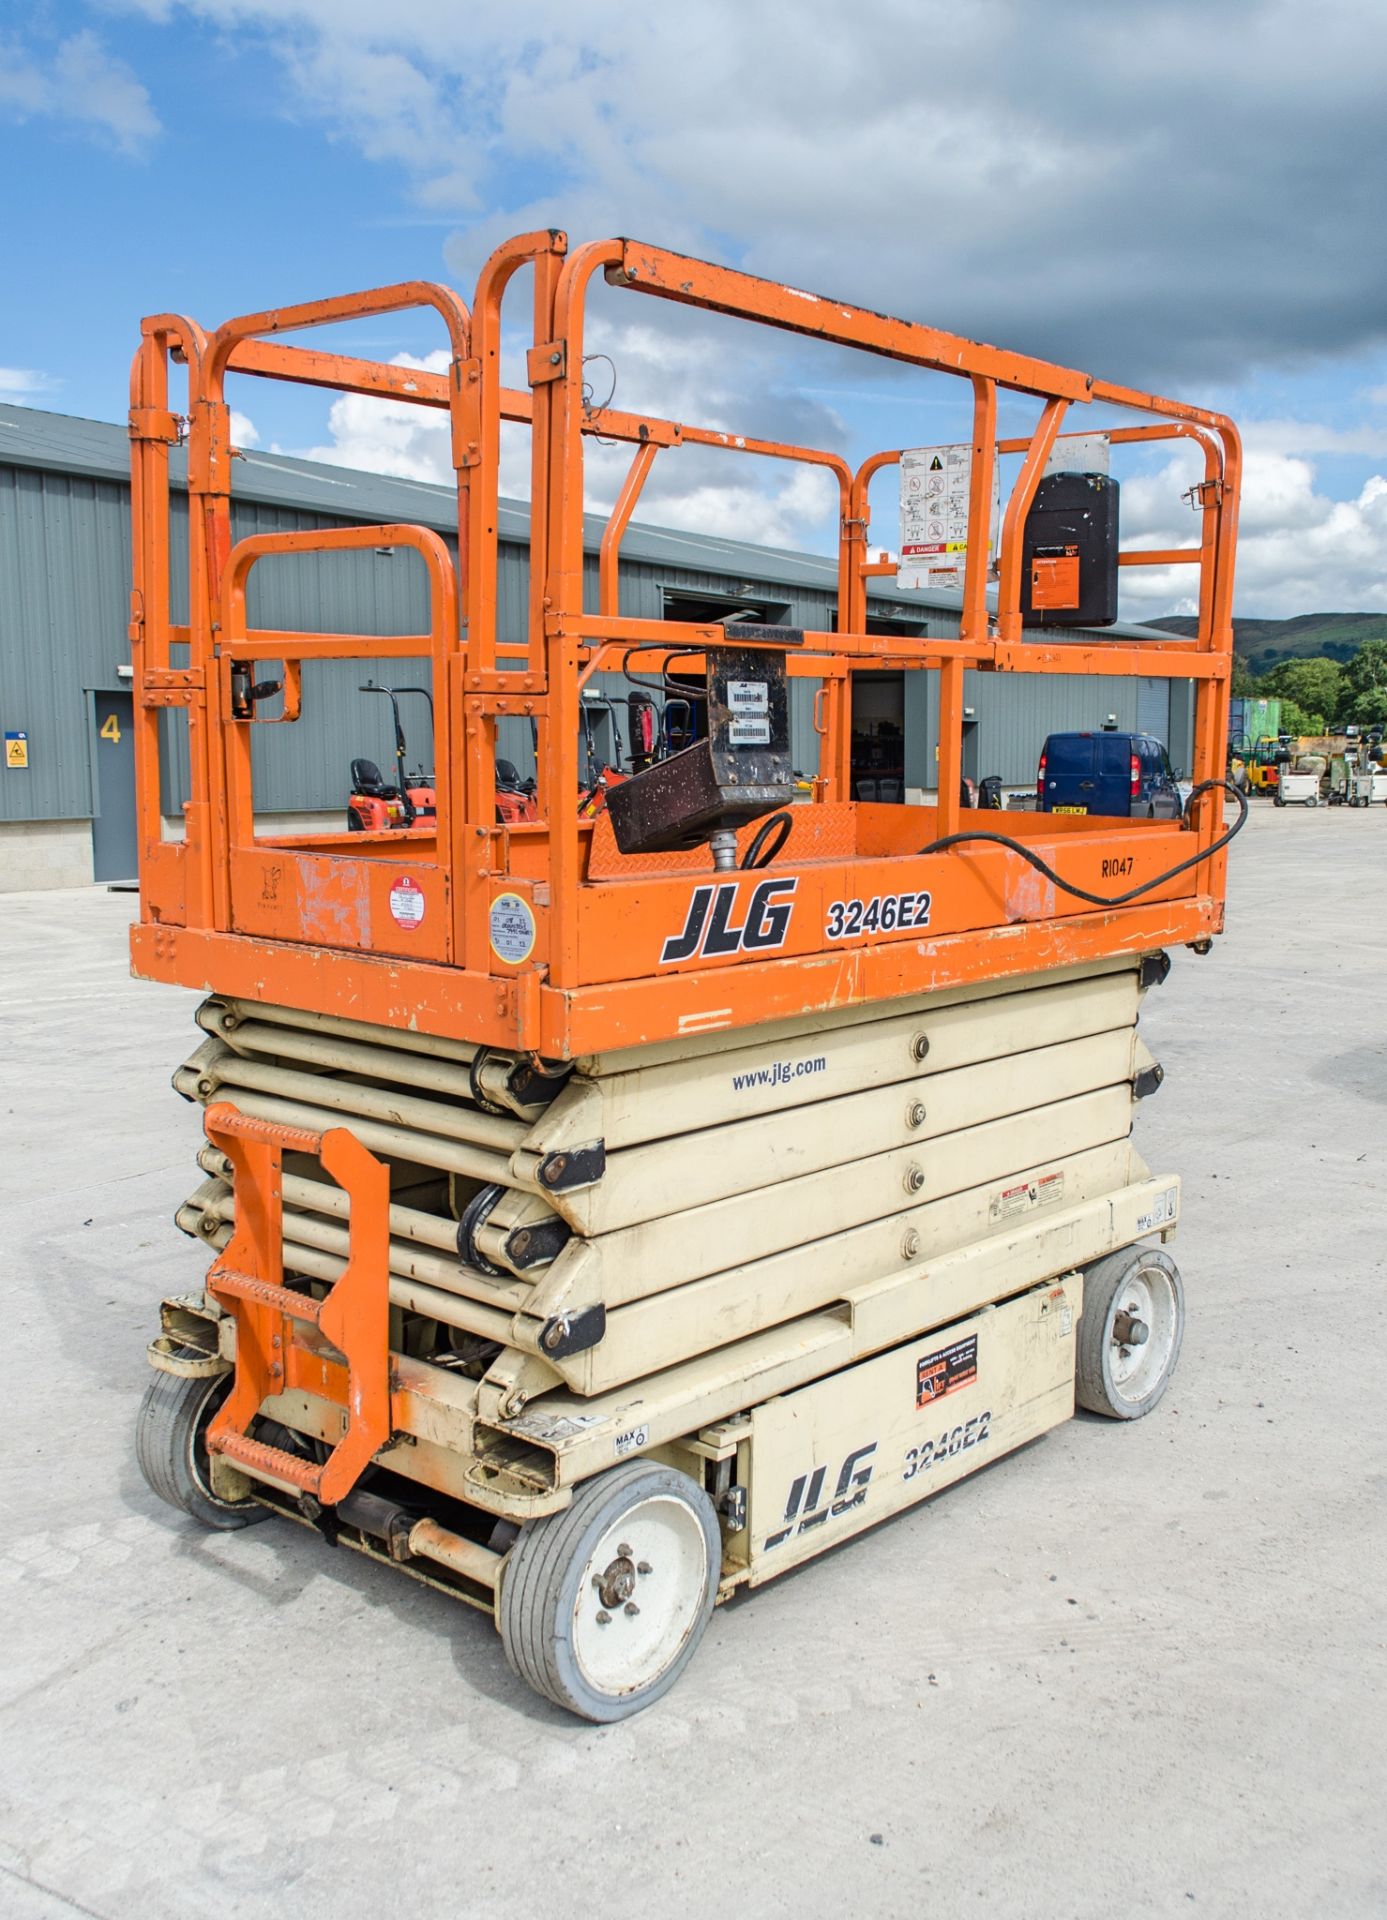 JLG 3246 E2 battery electric scissor lift Year: 2002 S/N: 0200103245 R1047 - Image 2 of 10